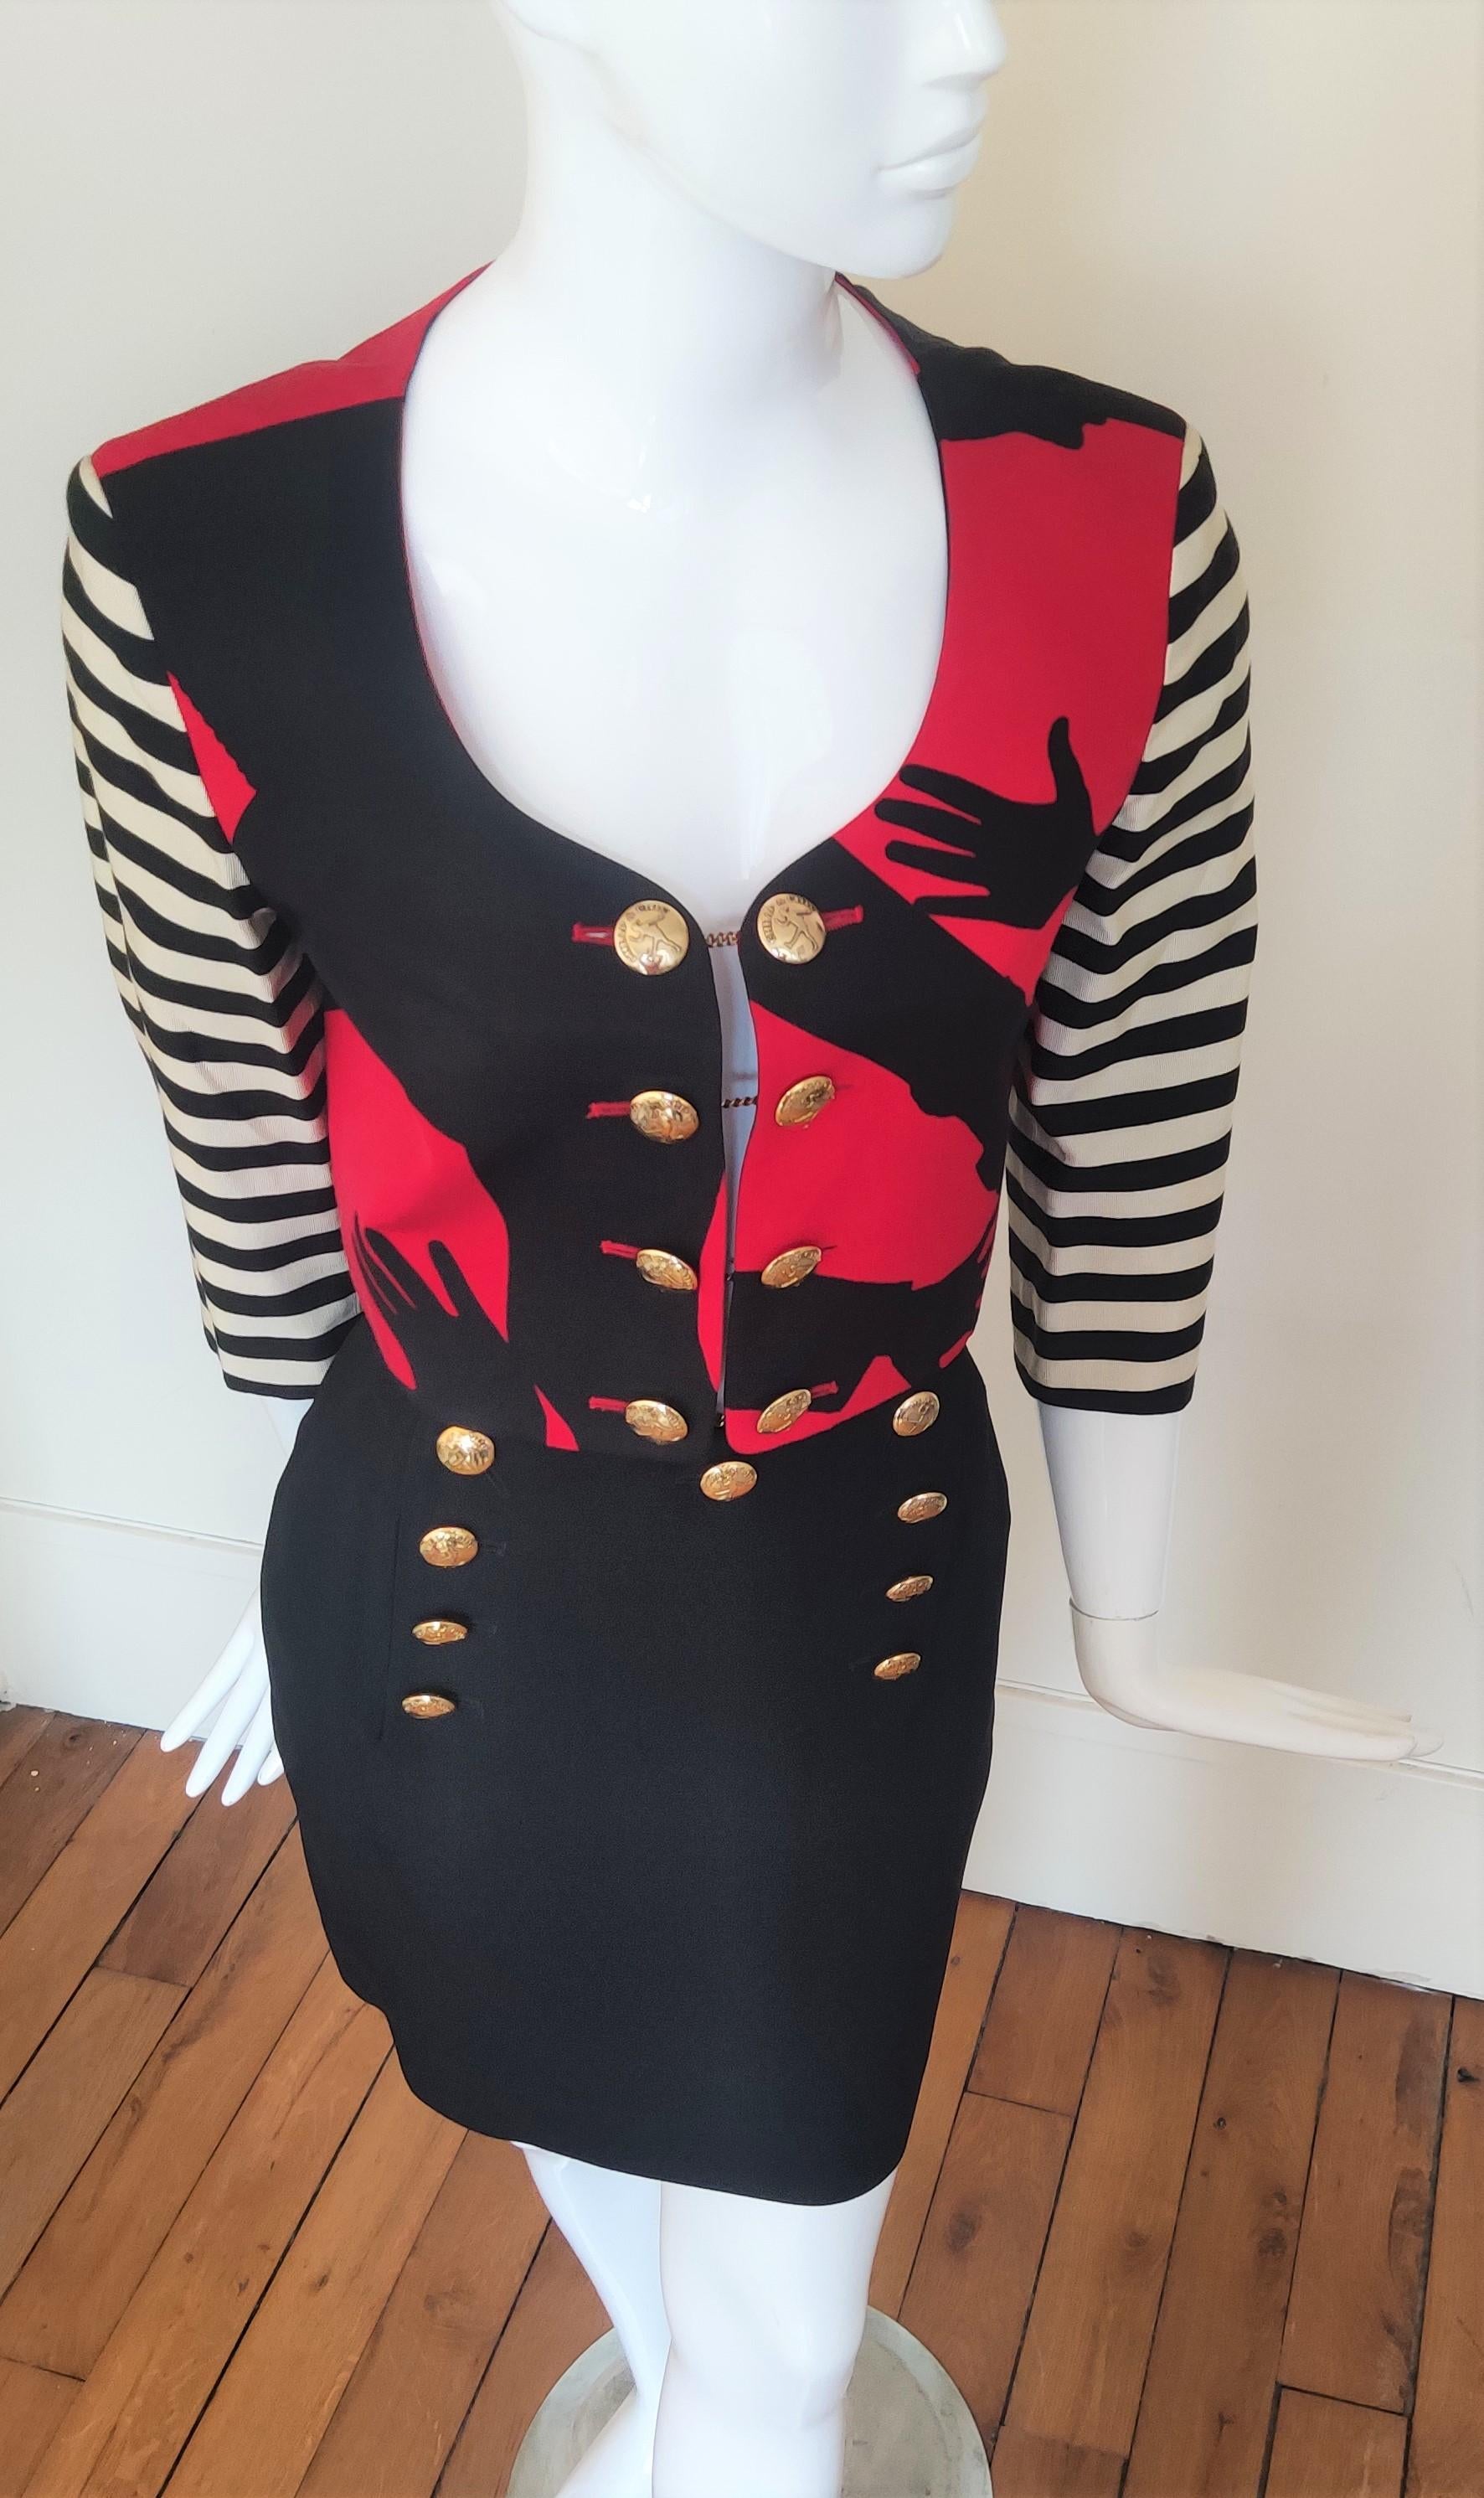 Vintage Moschino Cheap and Chic Olive Oyl (Popeye) silhouette print cropped jacket with red stripe sleeve and high waist silhouette print skirt.

Featuring eight cheap and chic good plated buttons connected by gold chains.
With shoulder